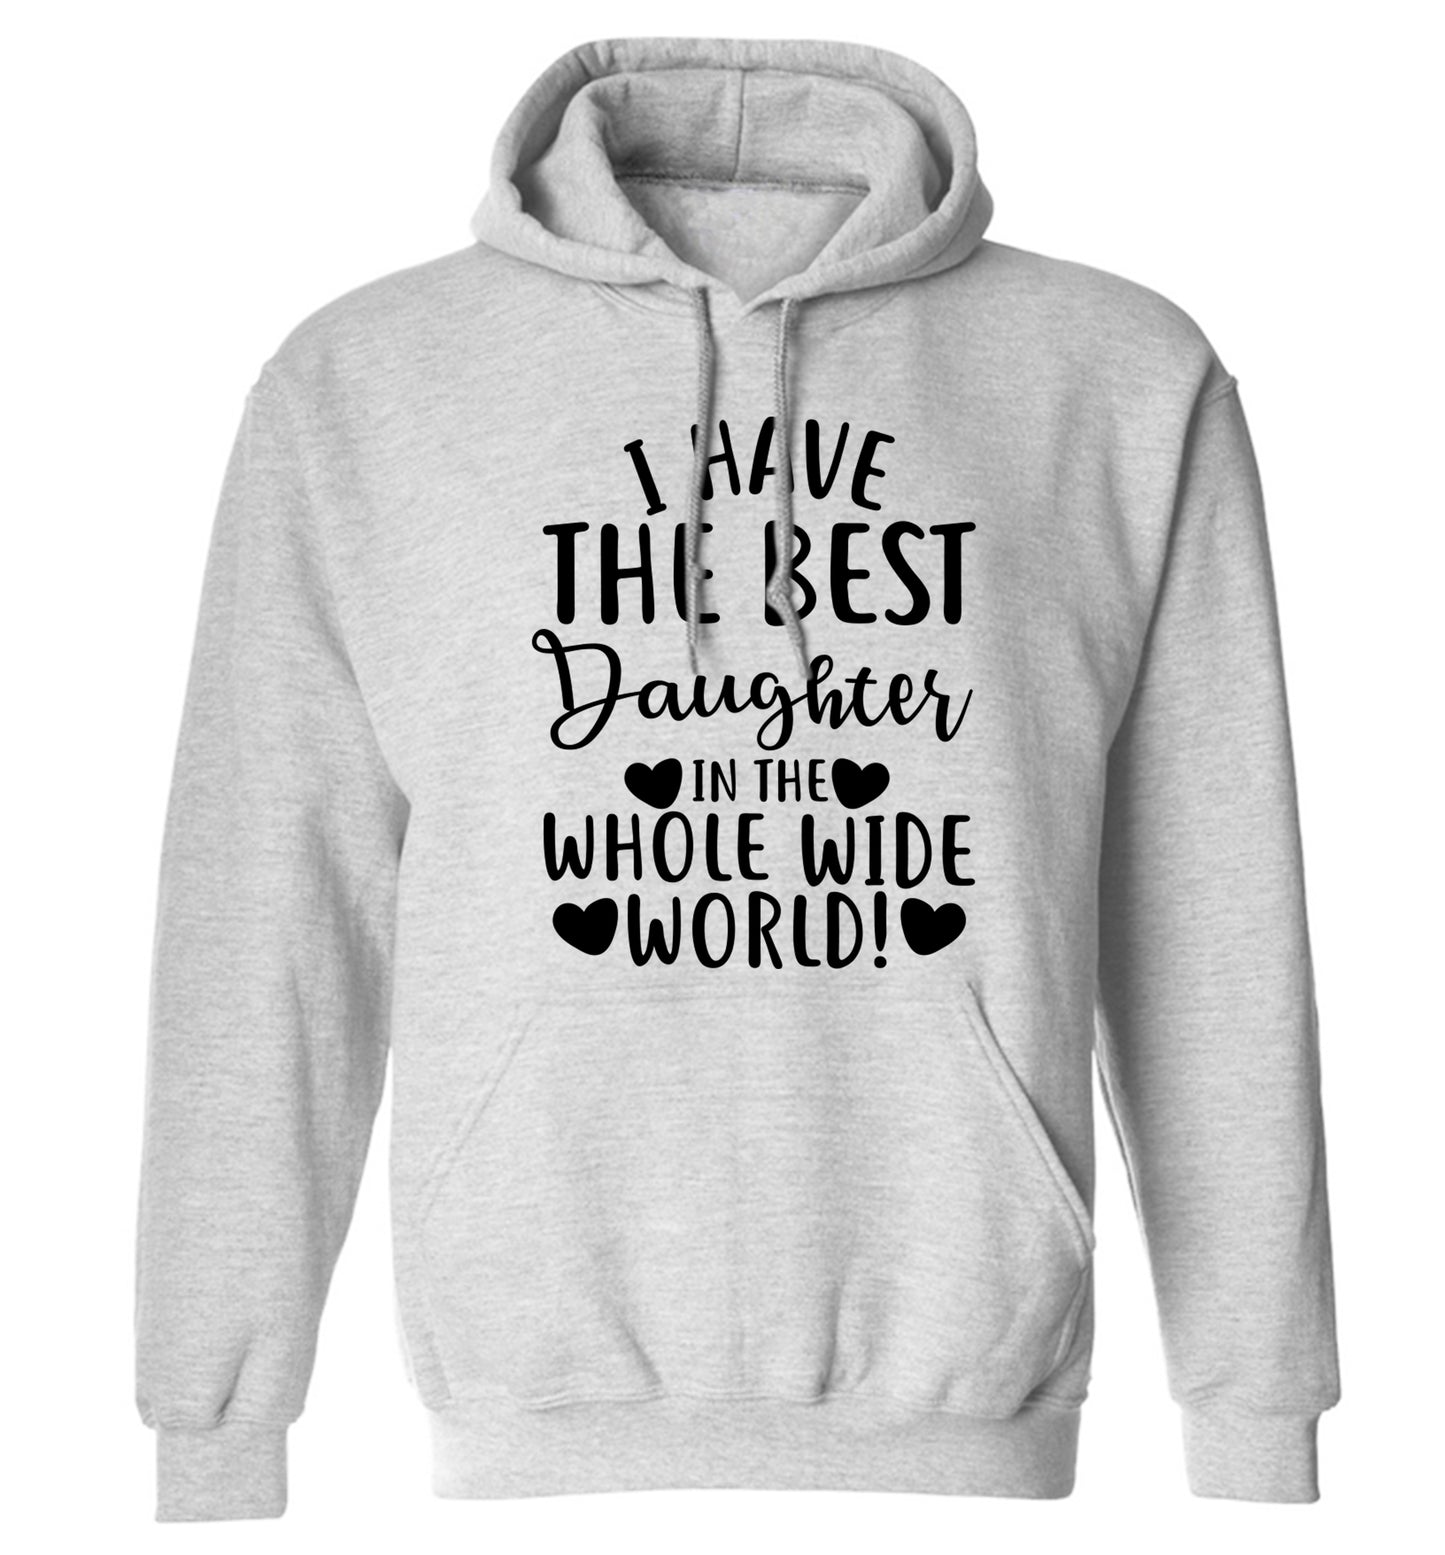 I have the best daughter in the whole wide world! adults unisex grey hoodie 2XL